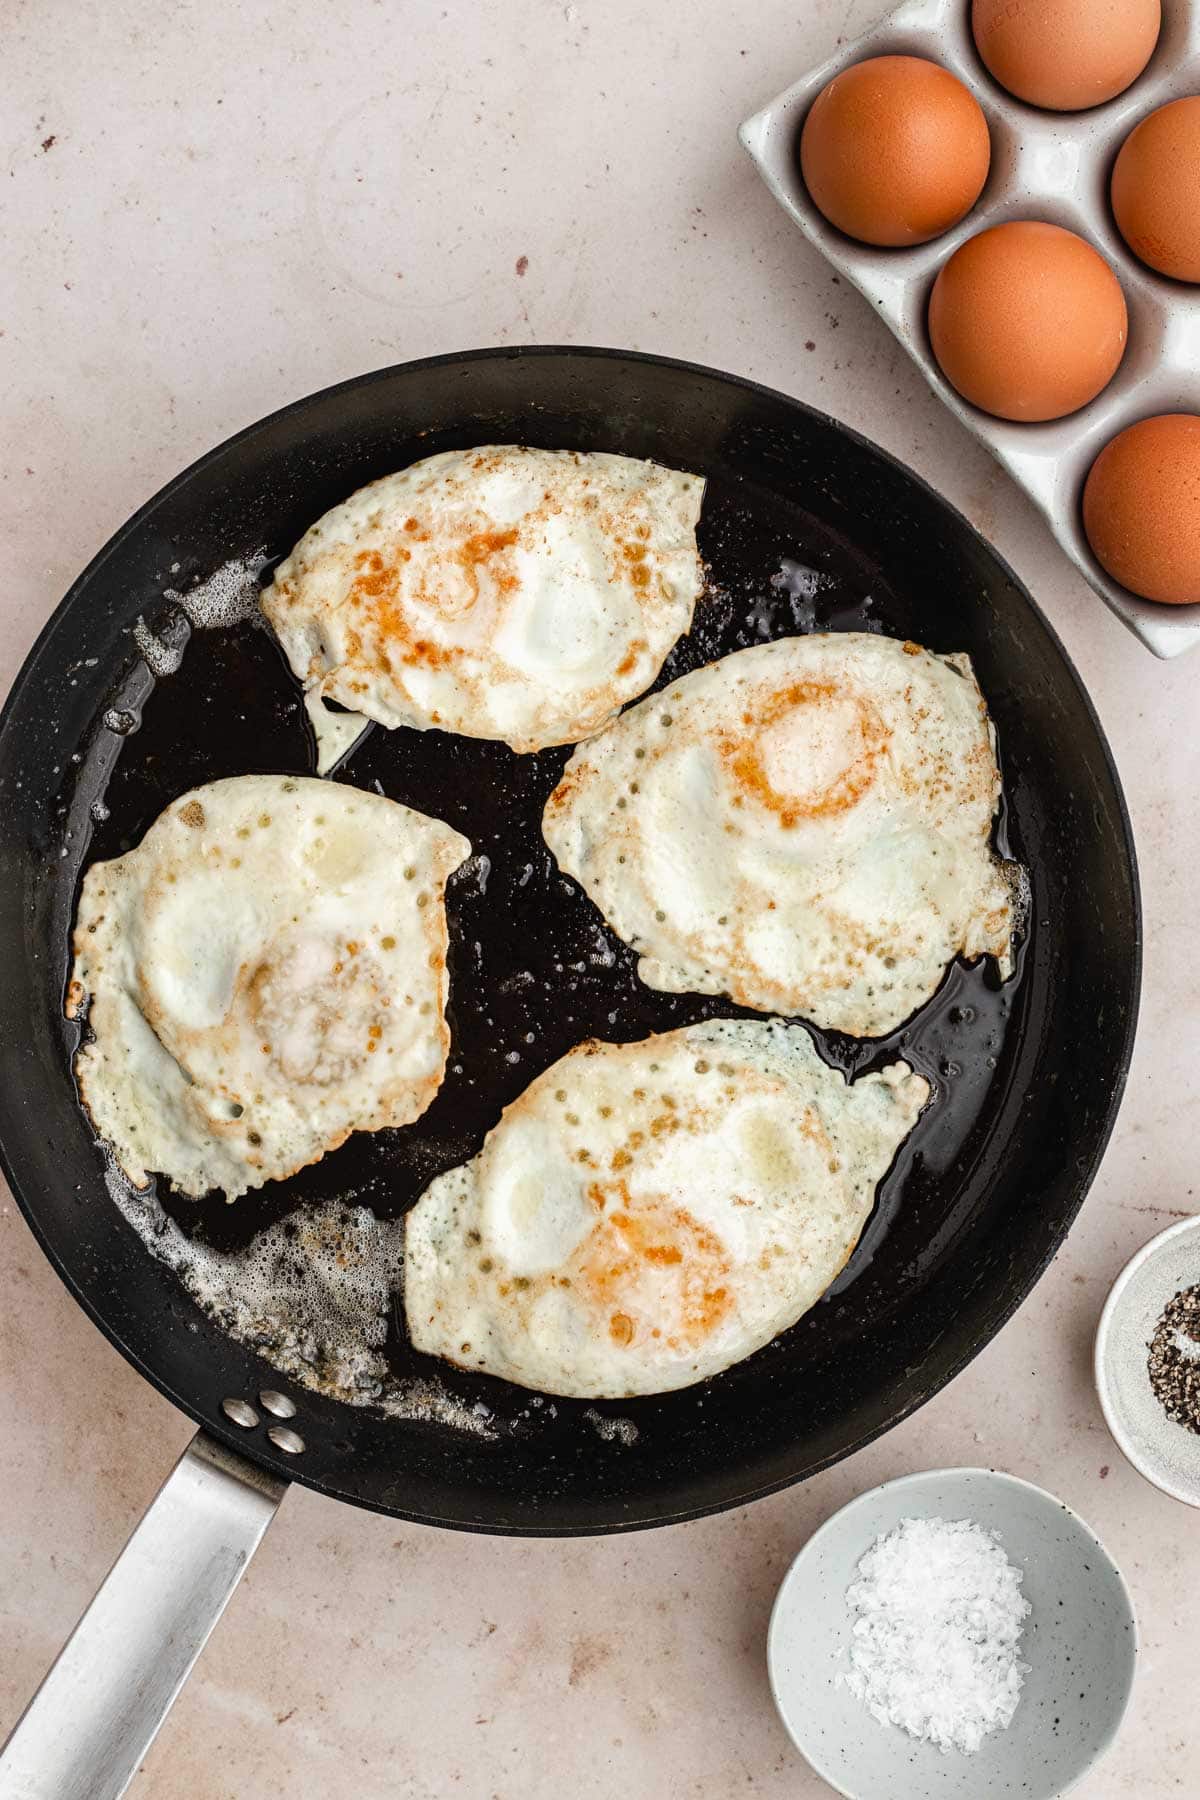 Over Easy Eggs in the pan, flipped